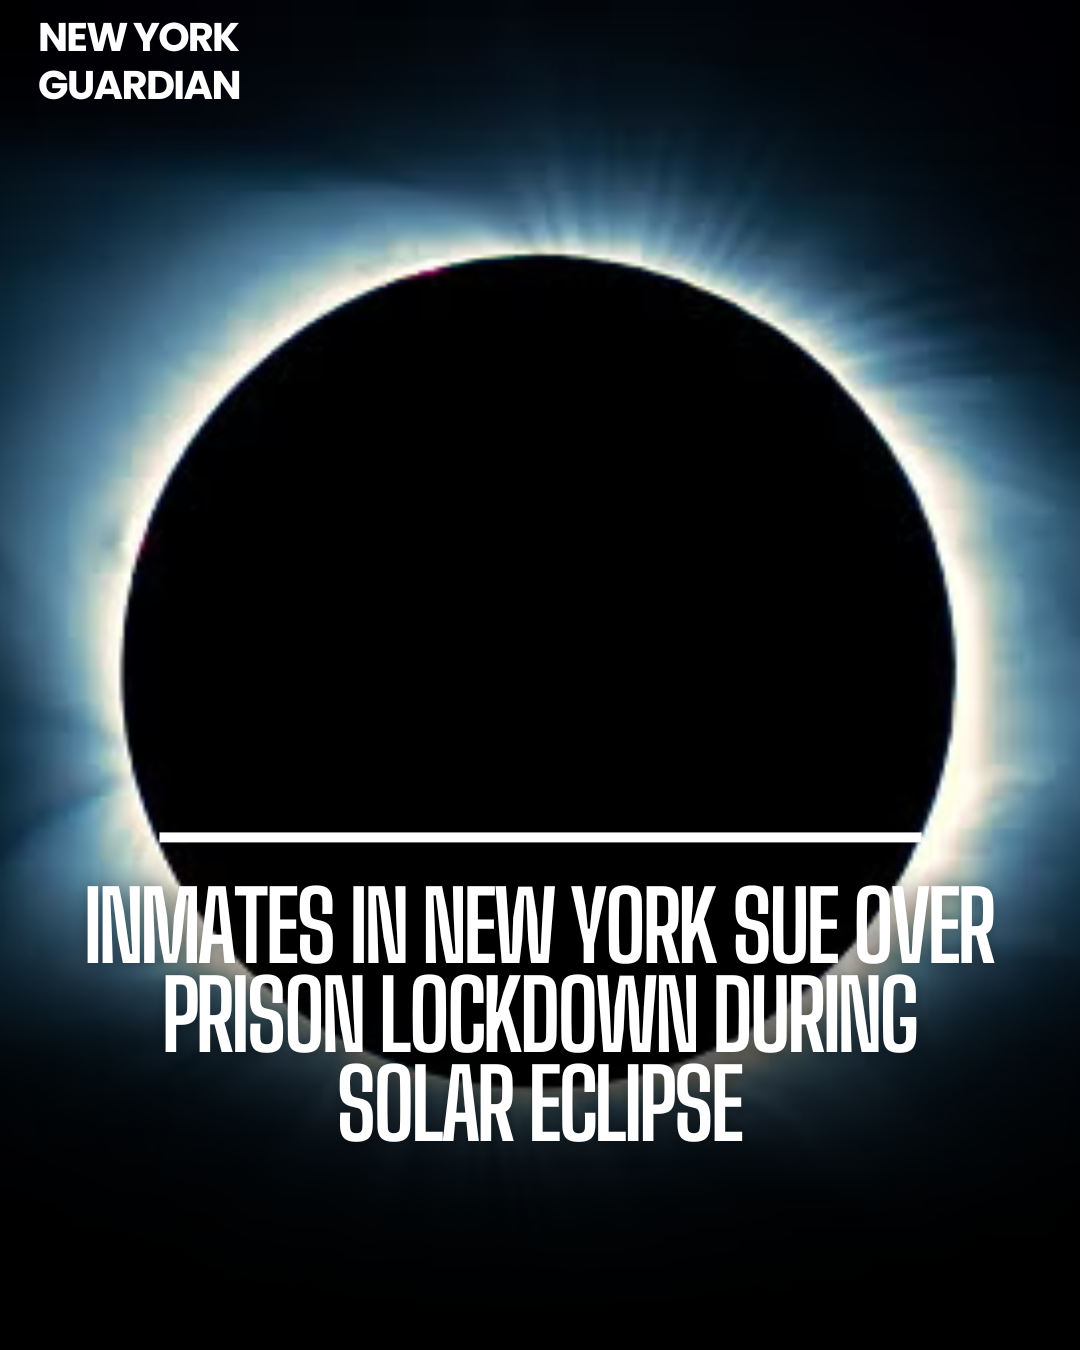 Inmates in New York have launched a federal lawsuit against the state correctional administration for imposing a lockdown during a solar eclipse.